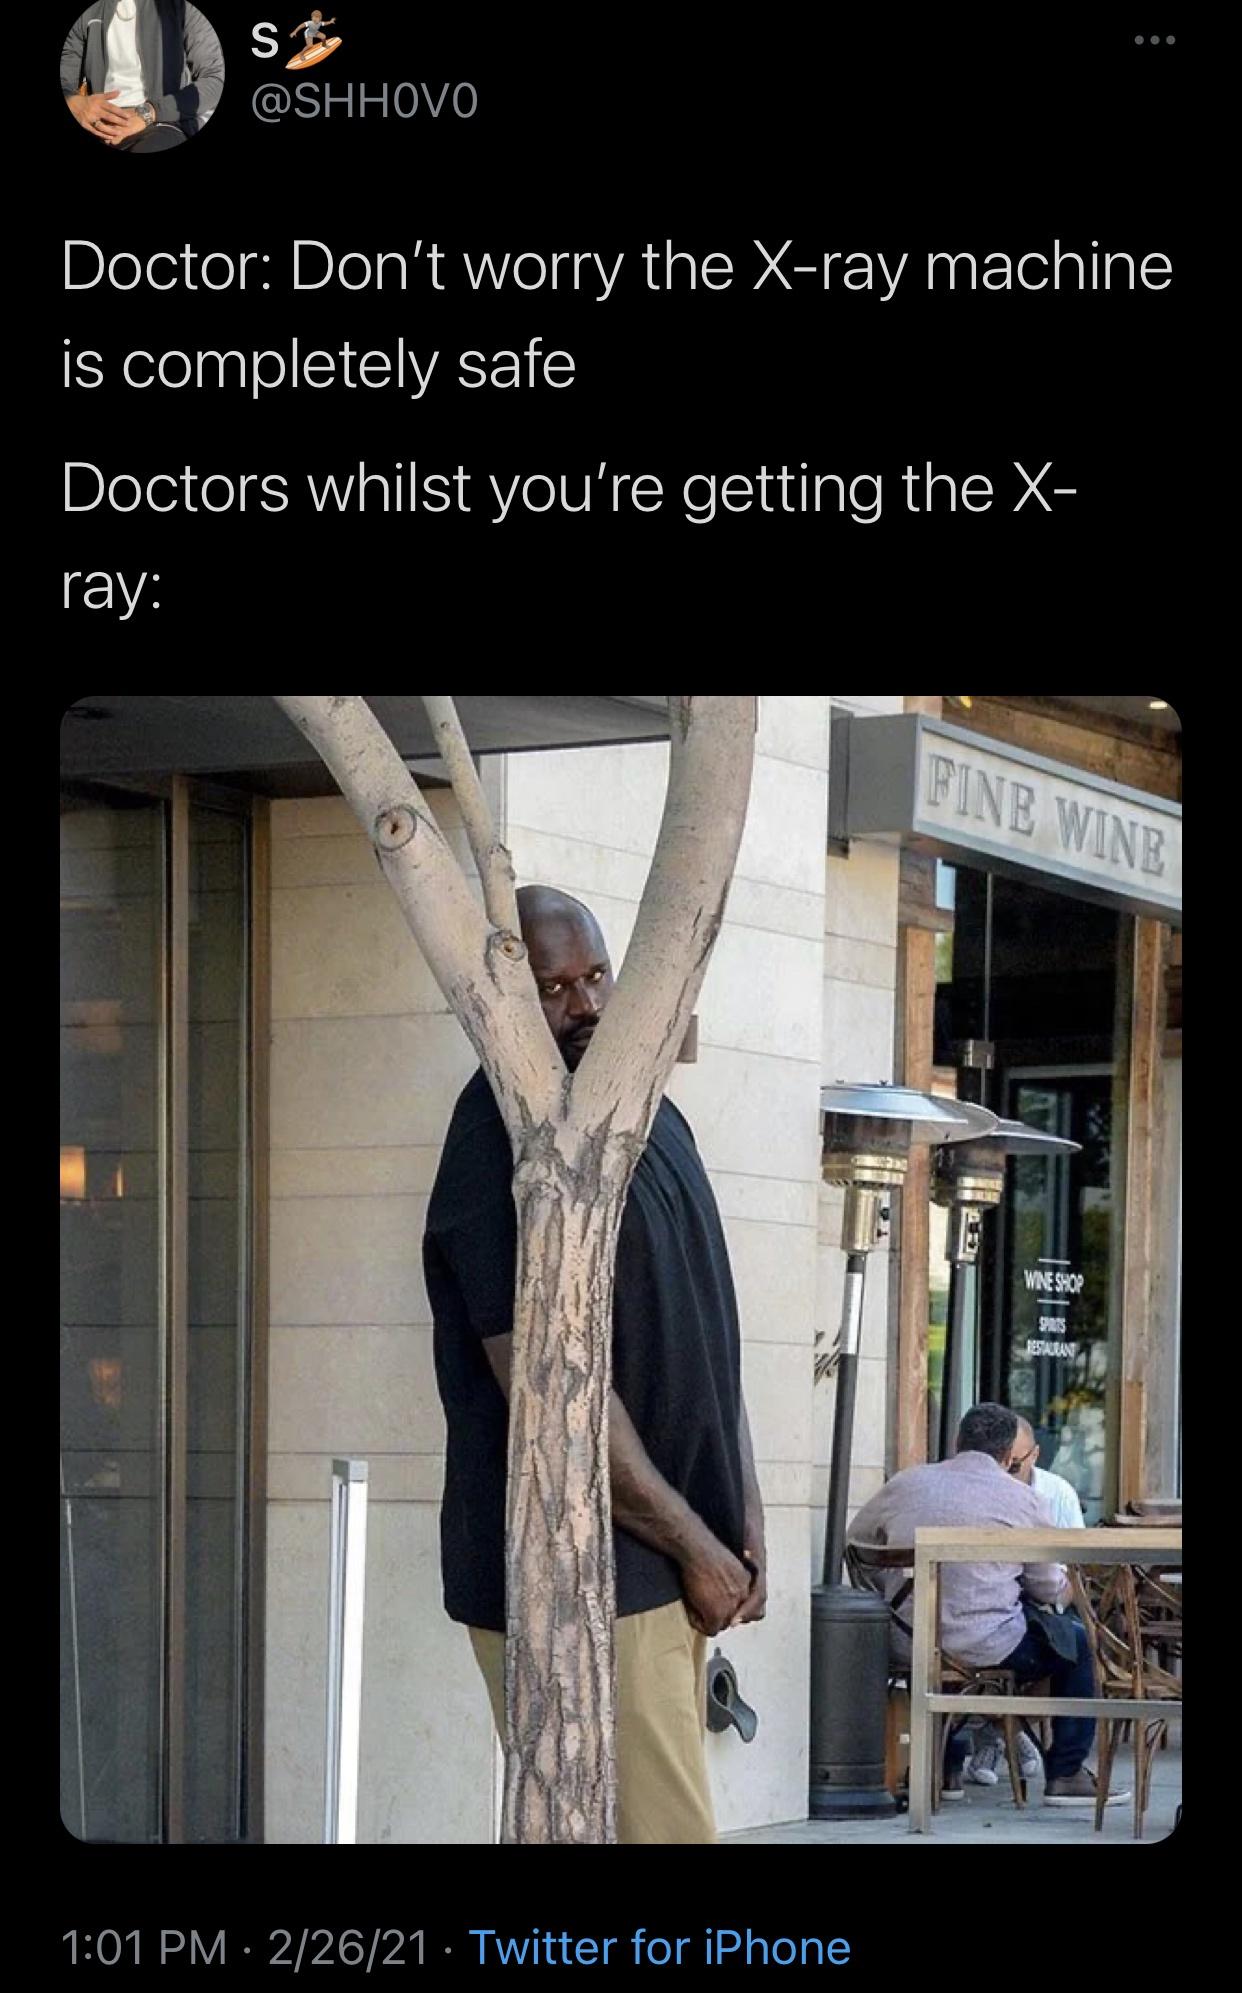 shaquille o neal paparazzi - S Doctor Don't worry the Xray machine is completely safe Doctors whilst you're getting the X ray Fine Wine Wne Shop 9IAS Resaltan 22621 Twitter for iPhone